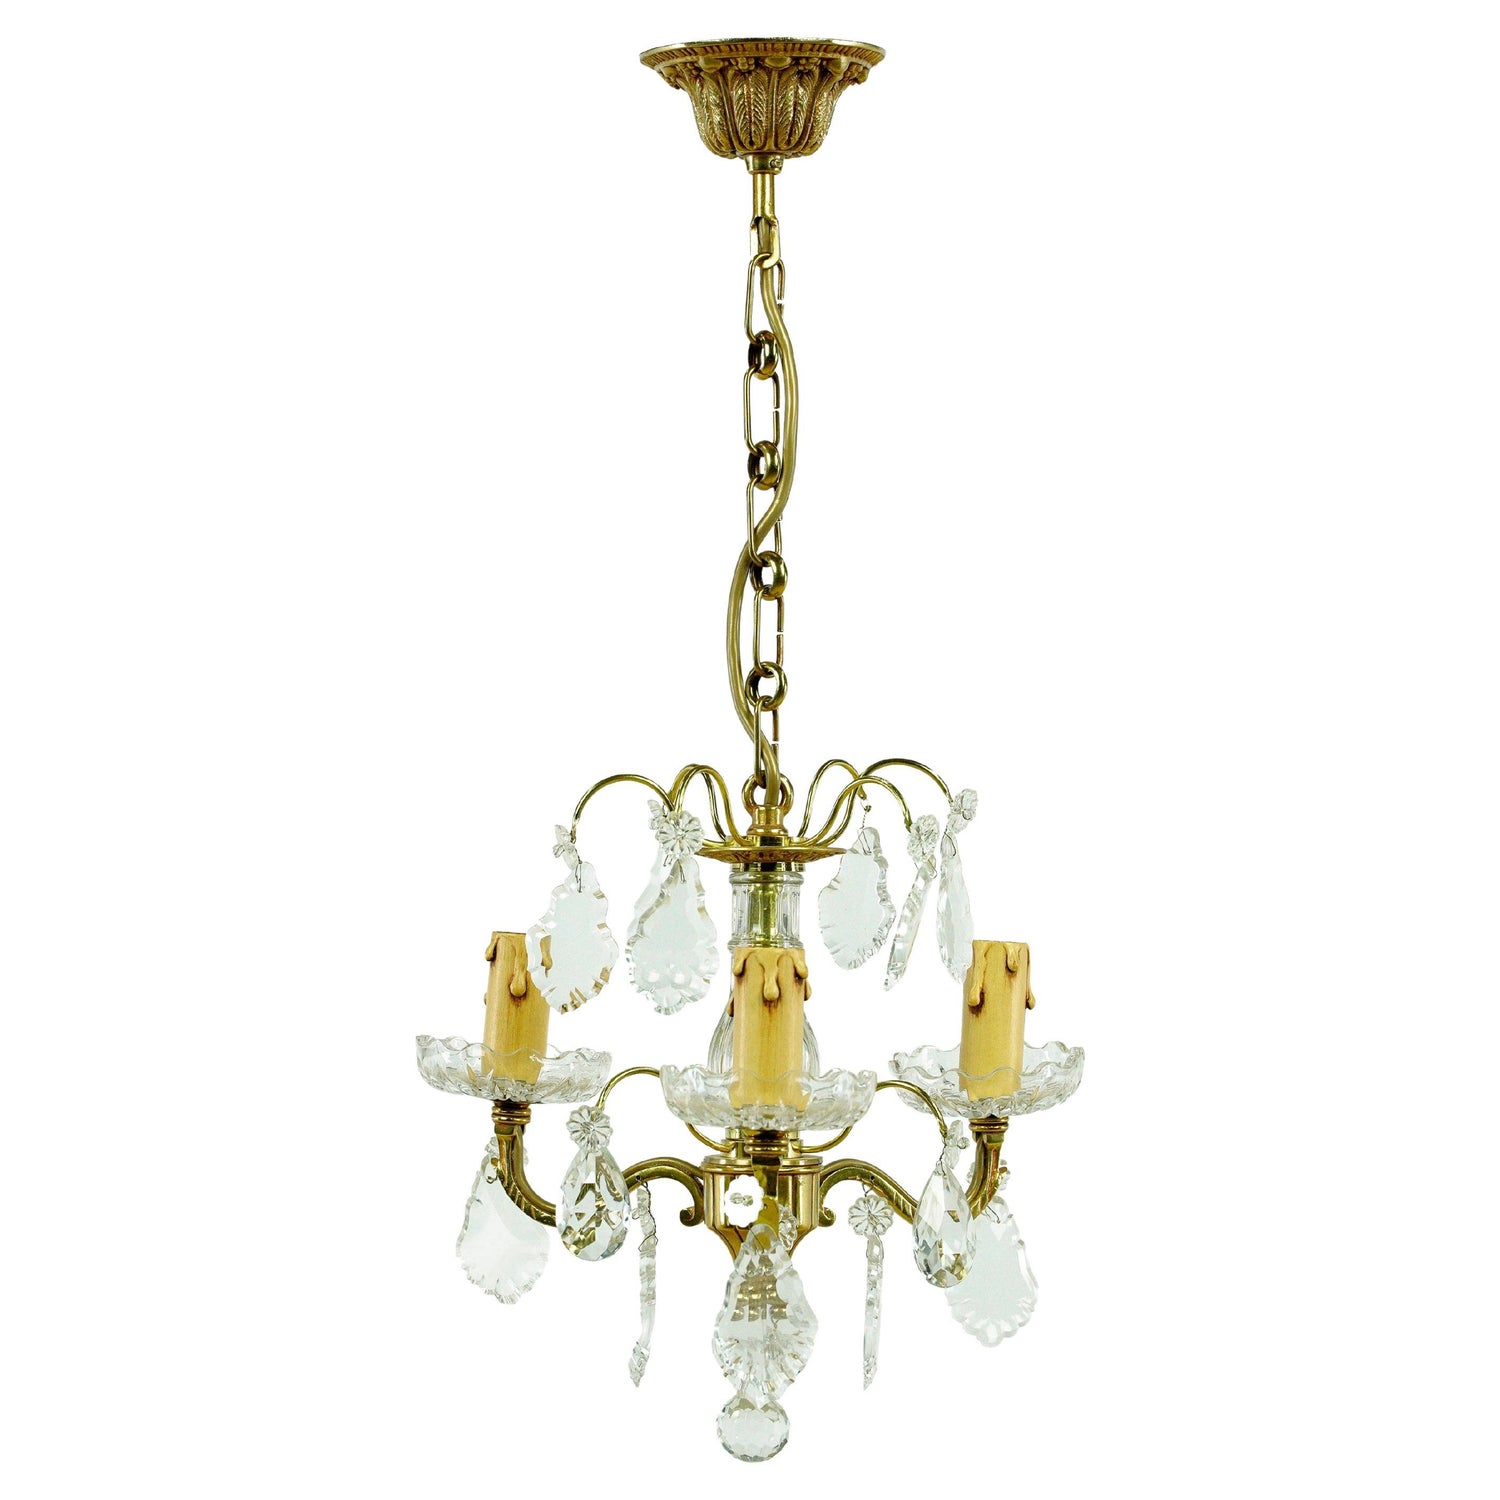 French Alabaster Brass 6 Arm Chandelier For Sale at 1stDibs